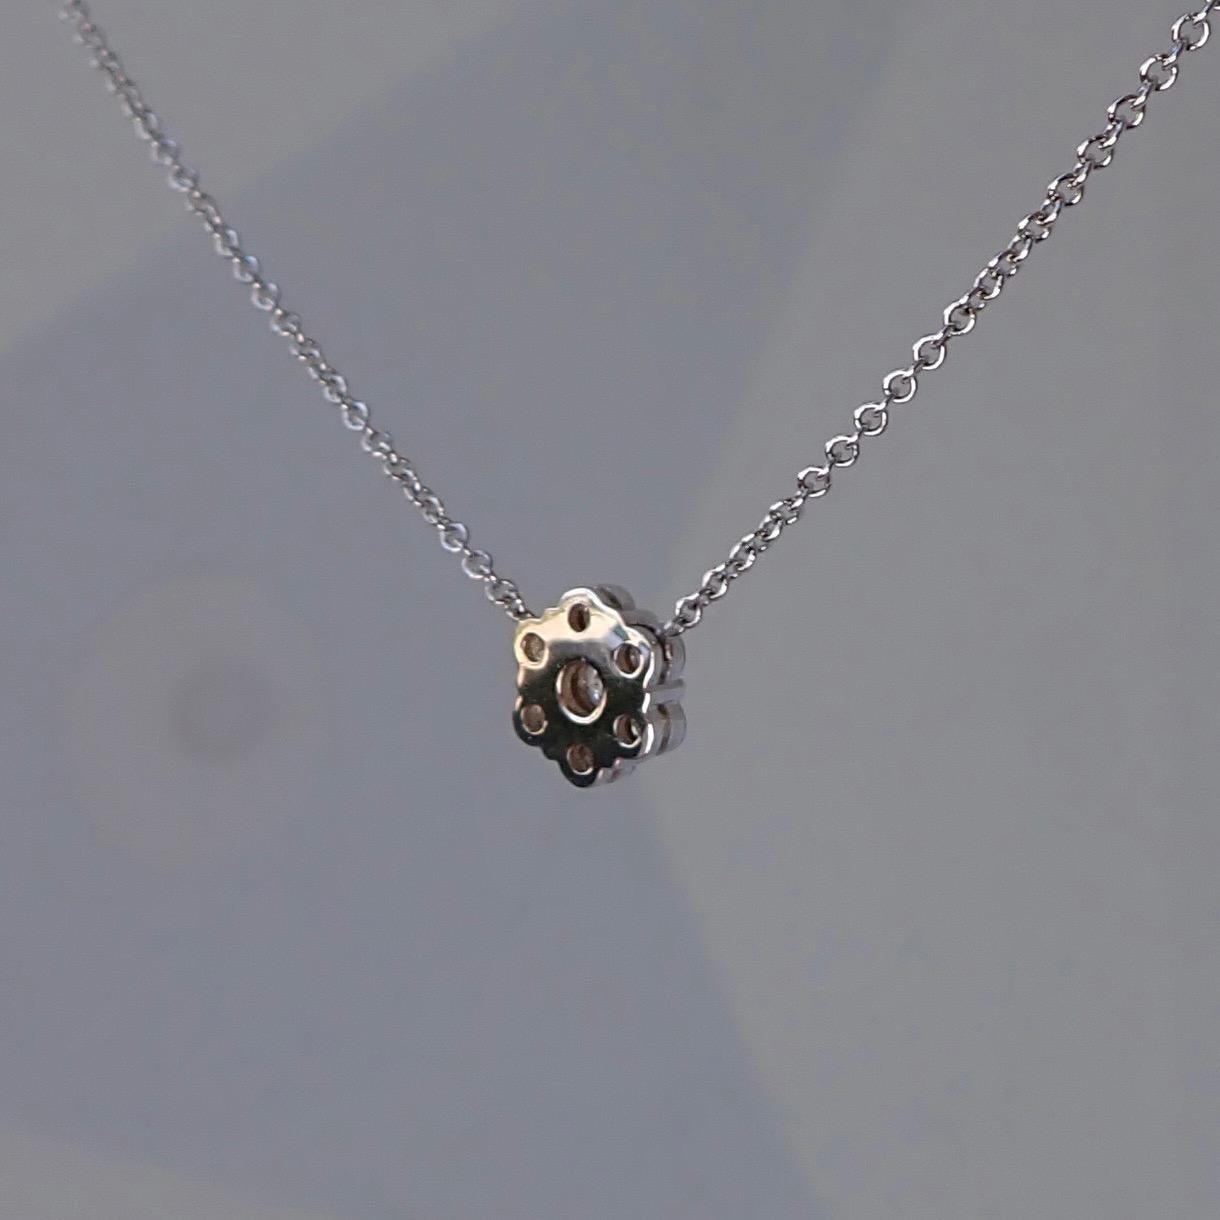 18k White Gold Pendant with 0.44 Carats of Diamond on Cable Chain For Sale 1